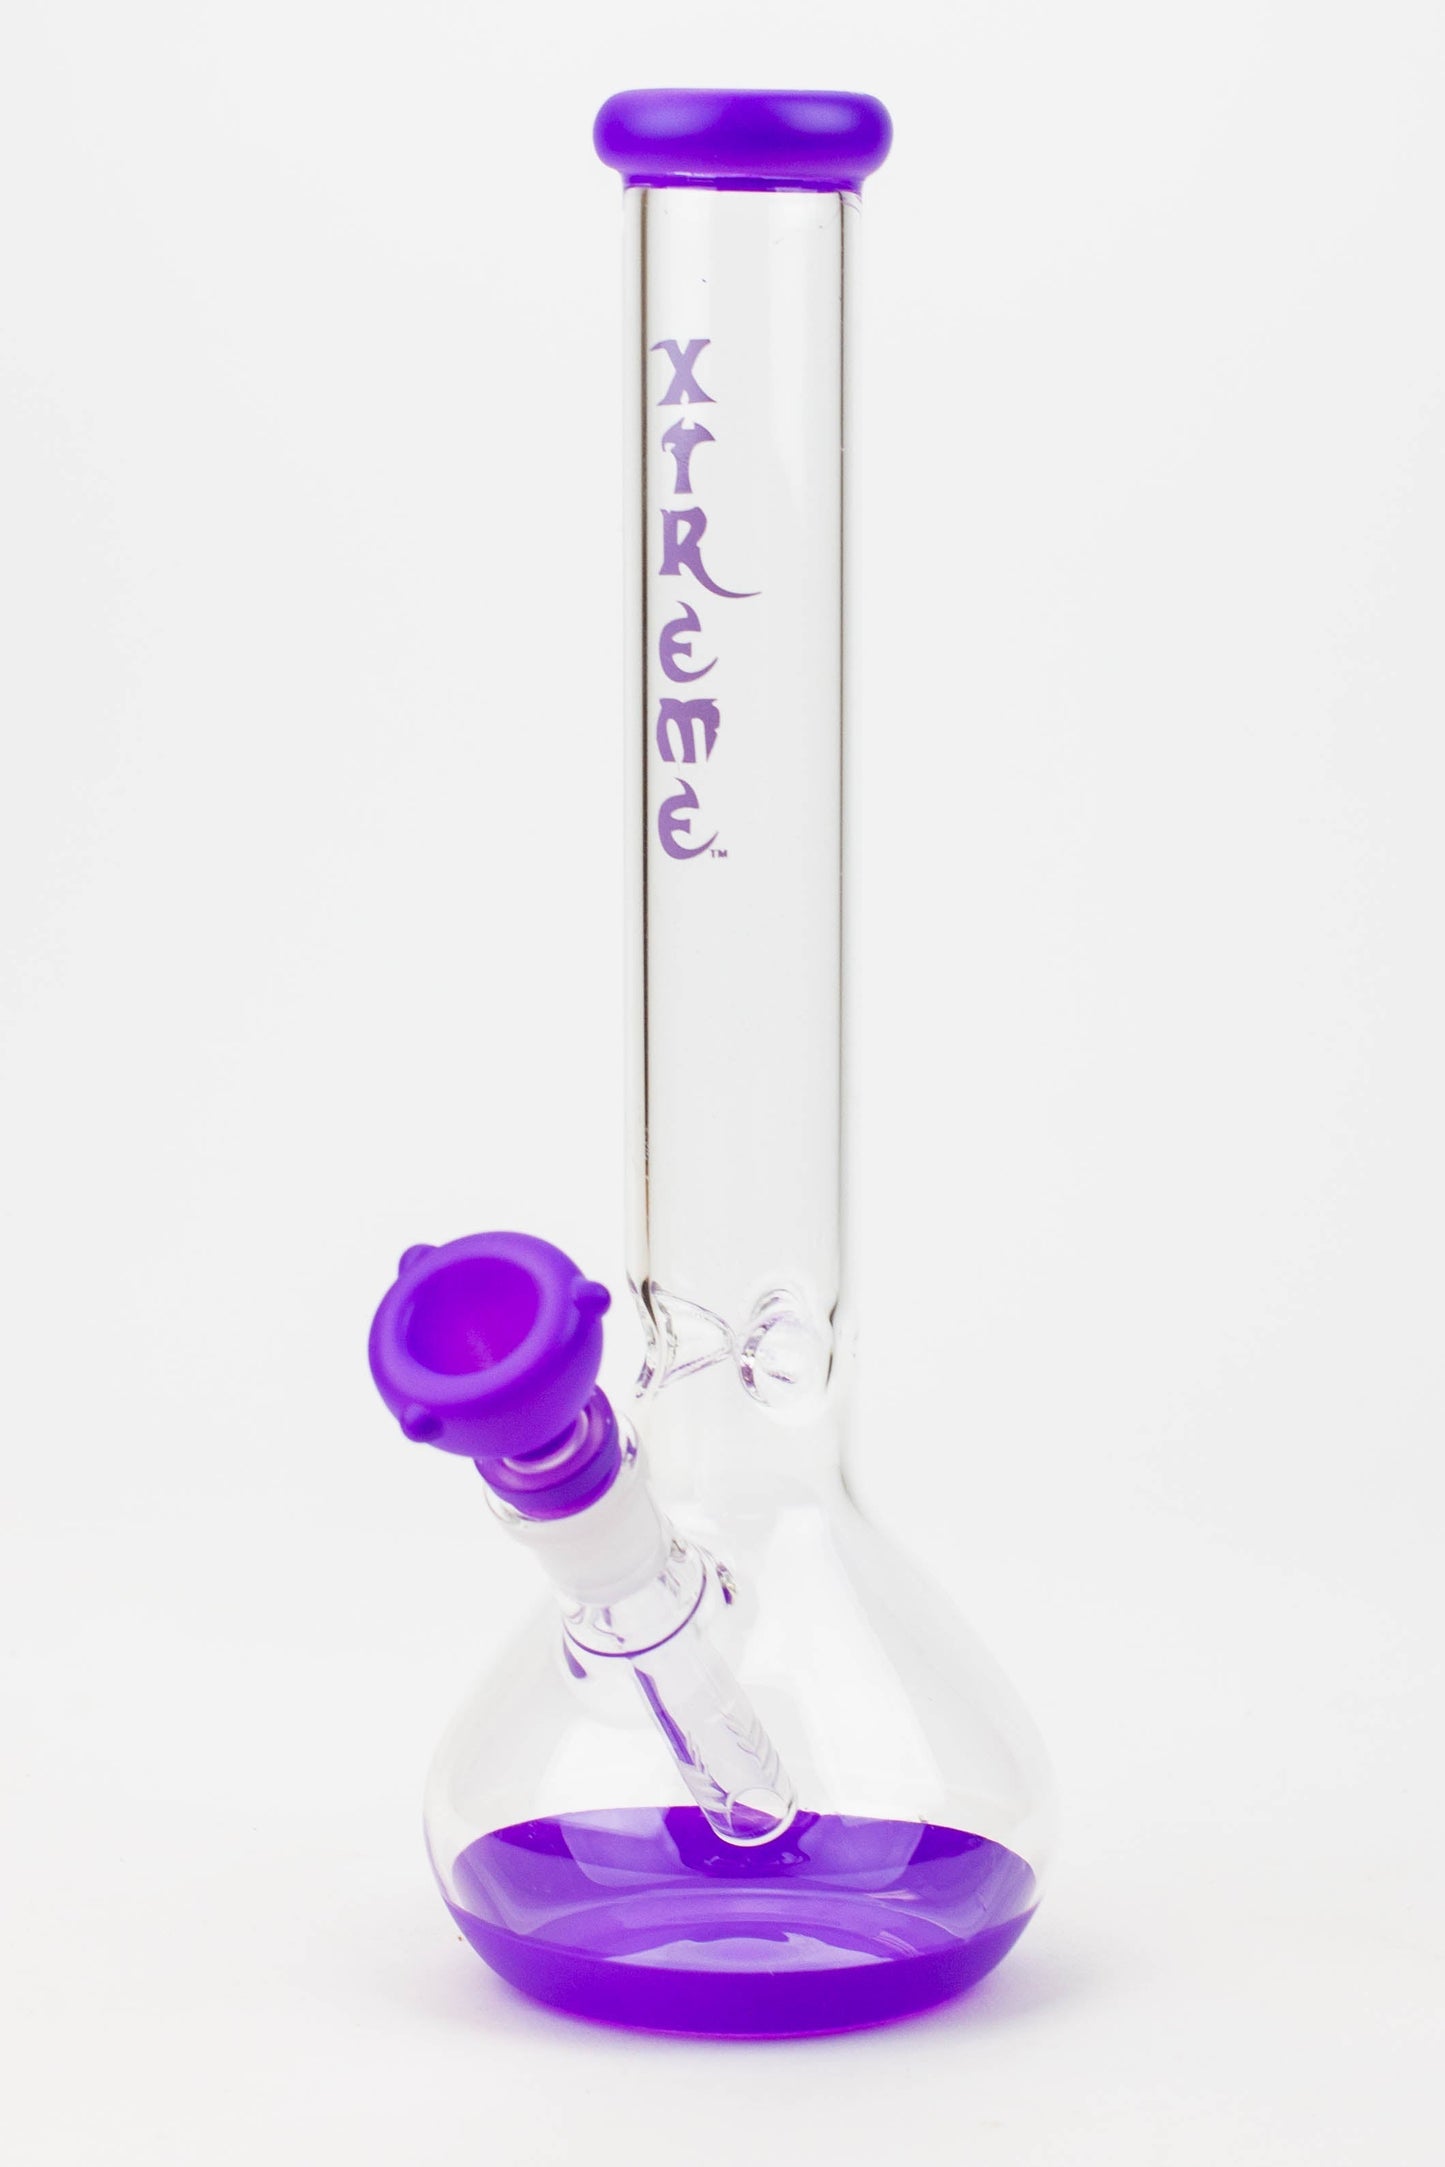 12" XTREME Round base Glass Bong [XTR5008] Flower Power Packages Purple 